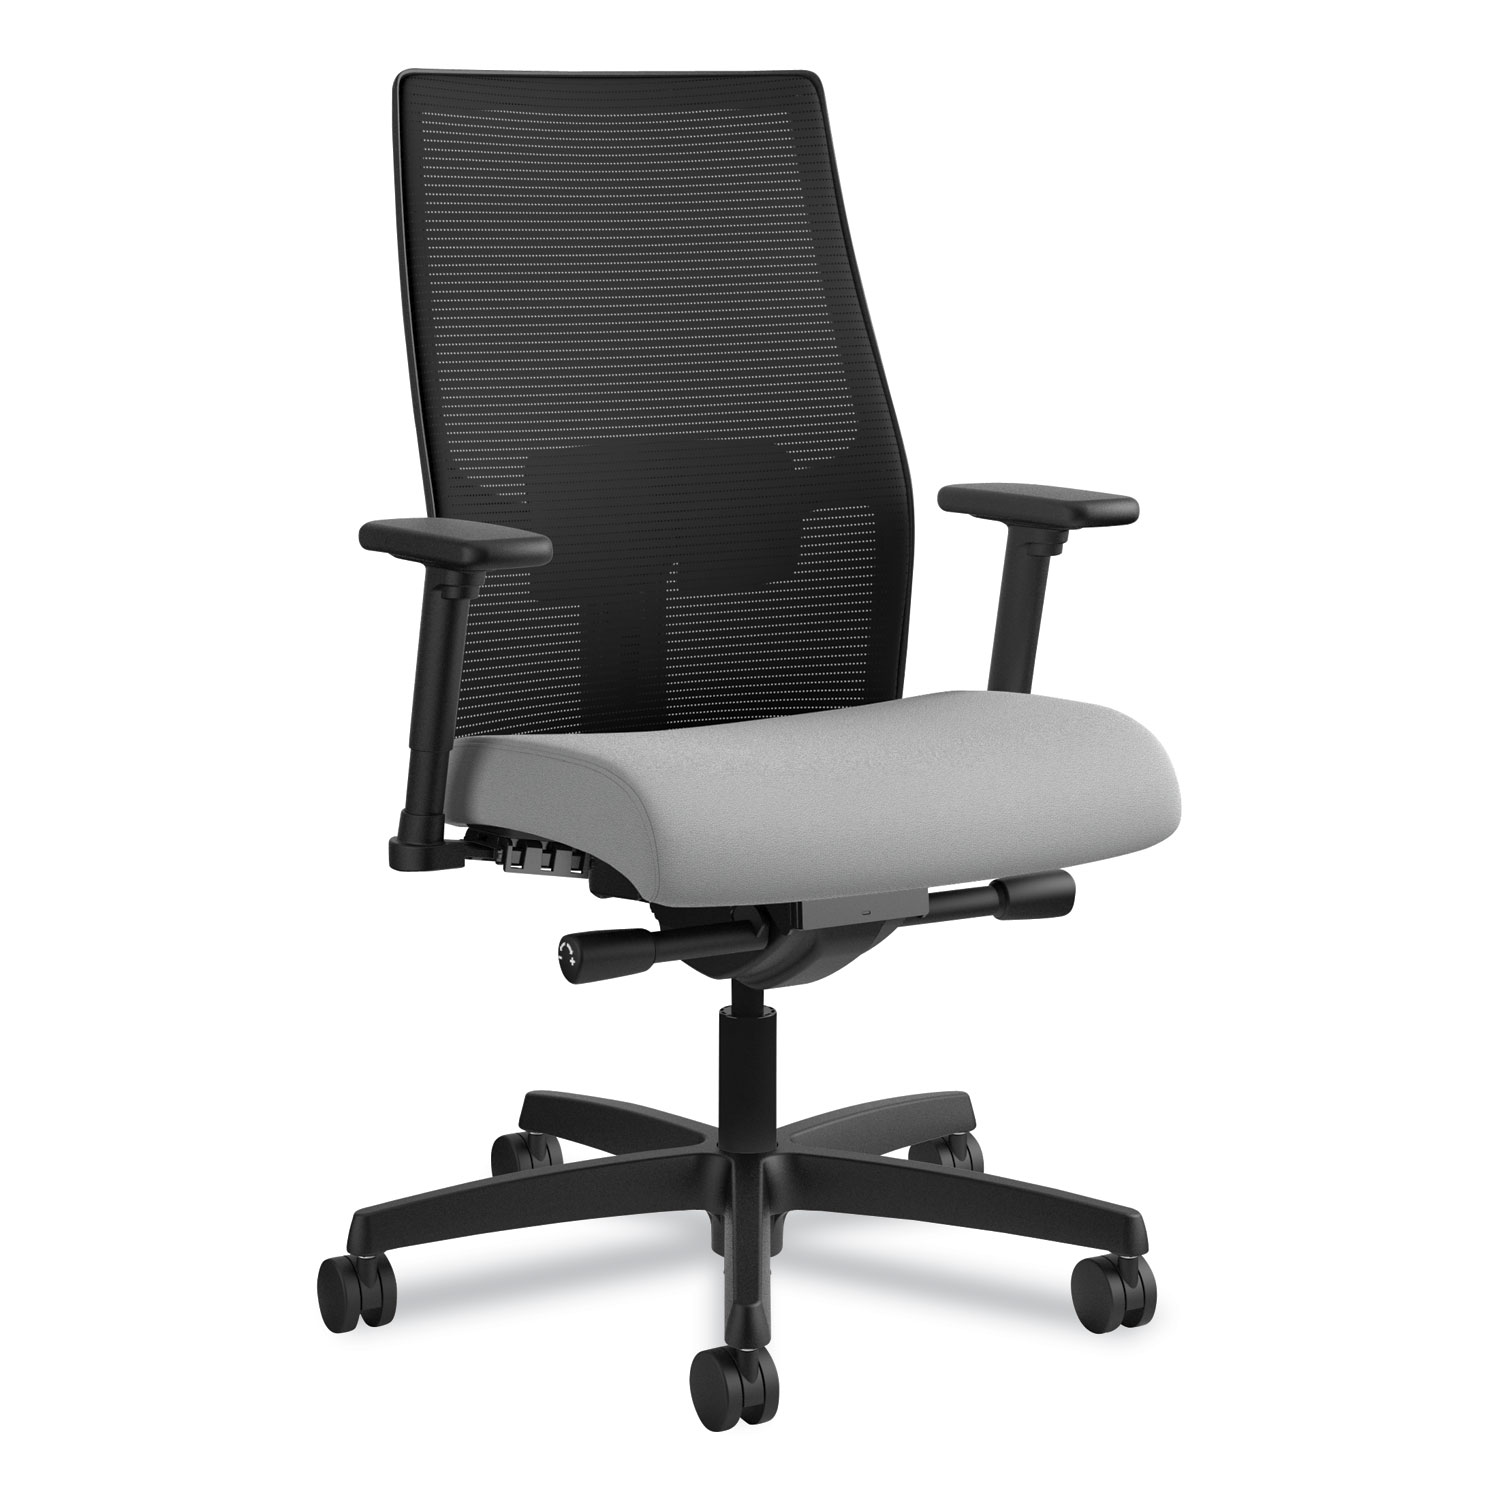  HON HONI2M2AMLC22TK Ignition 2.0 4-Way Stretch Mid-Back Mesh Task Chair, Supports up to 300 lbs., Frost Seat, Black Back, Black Base (HONI2M2AMLC22TK) 